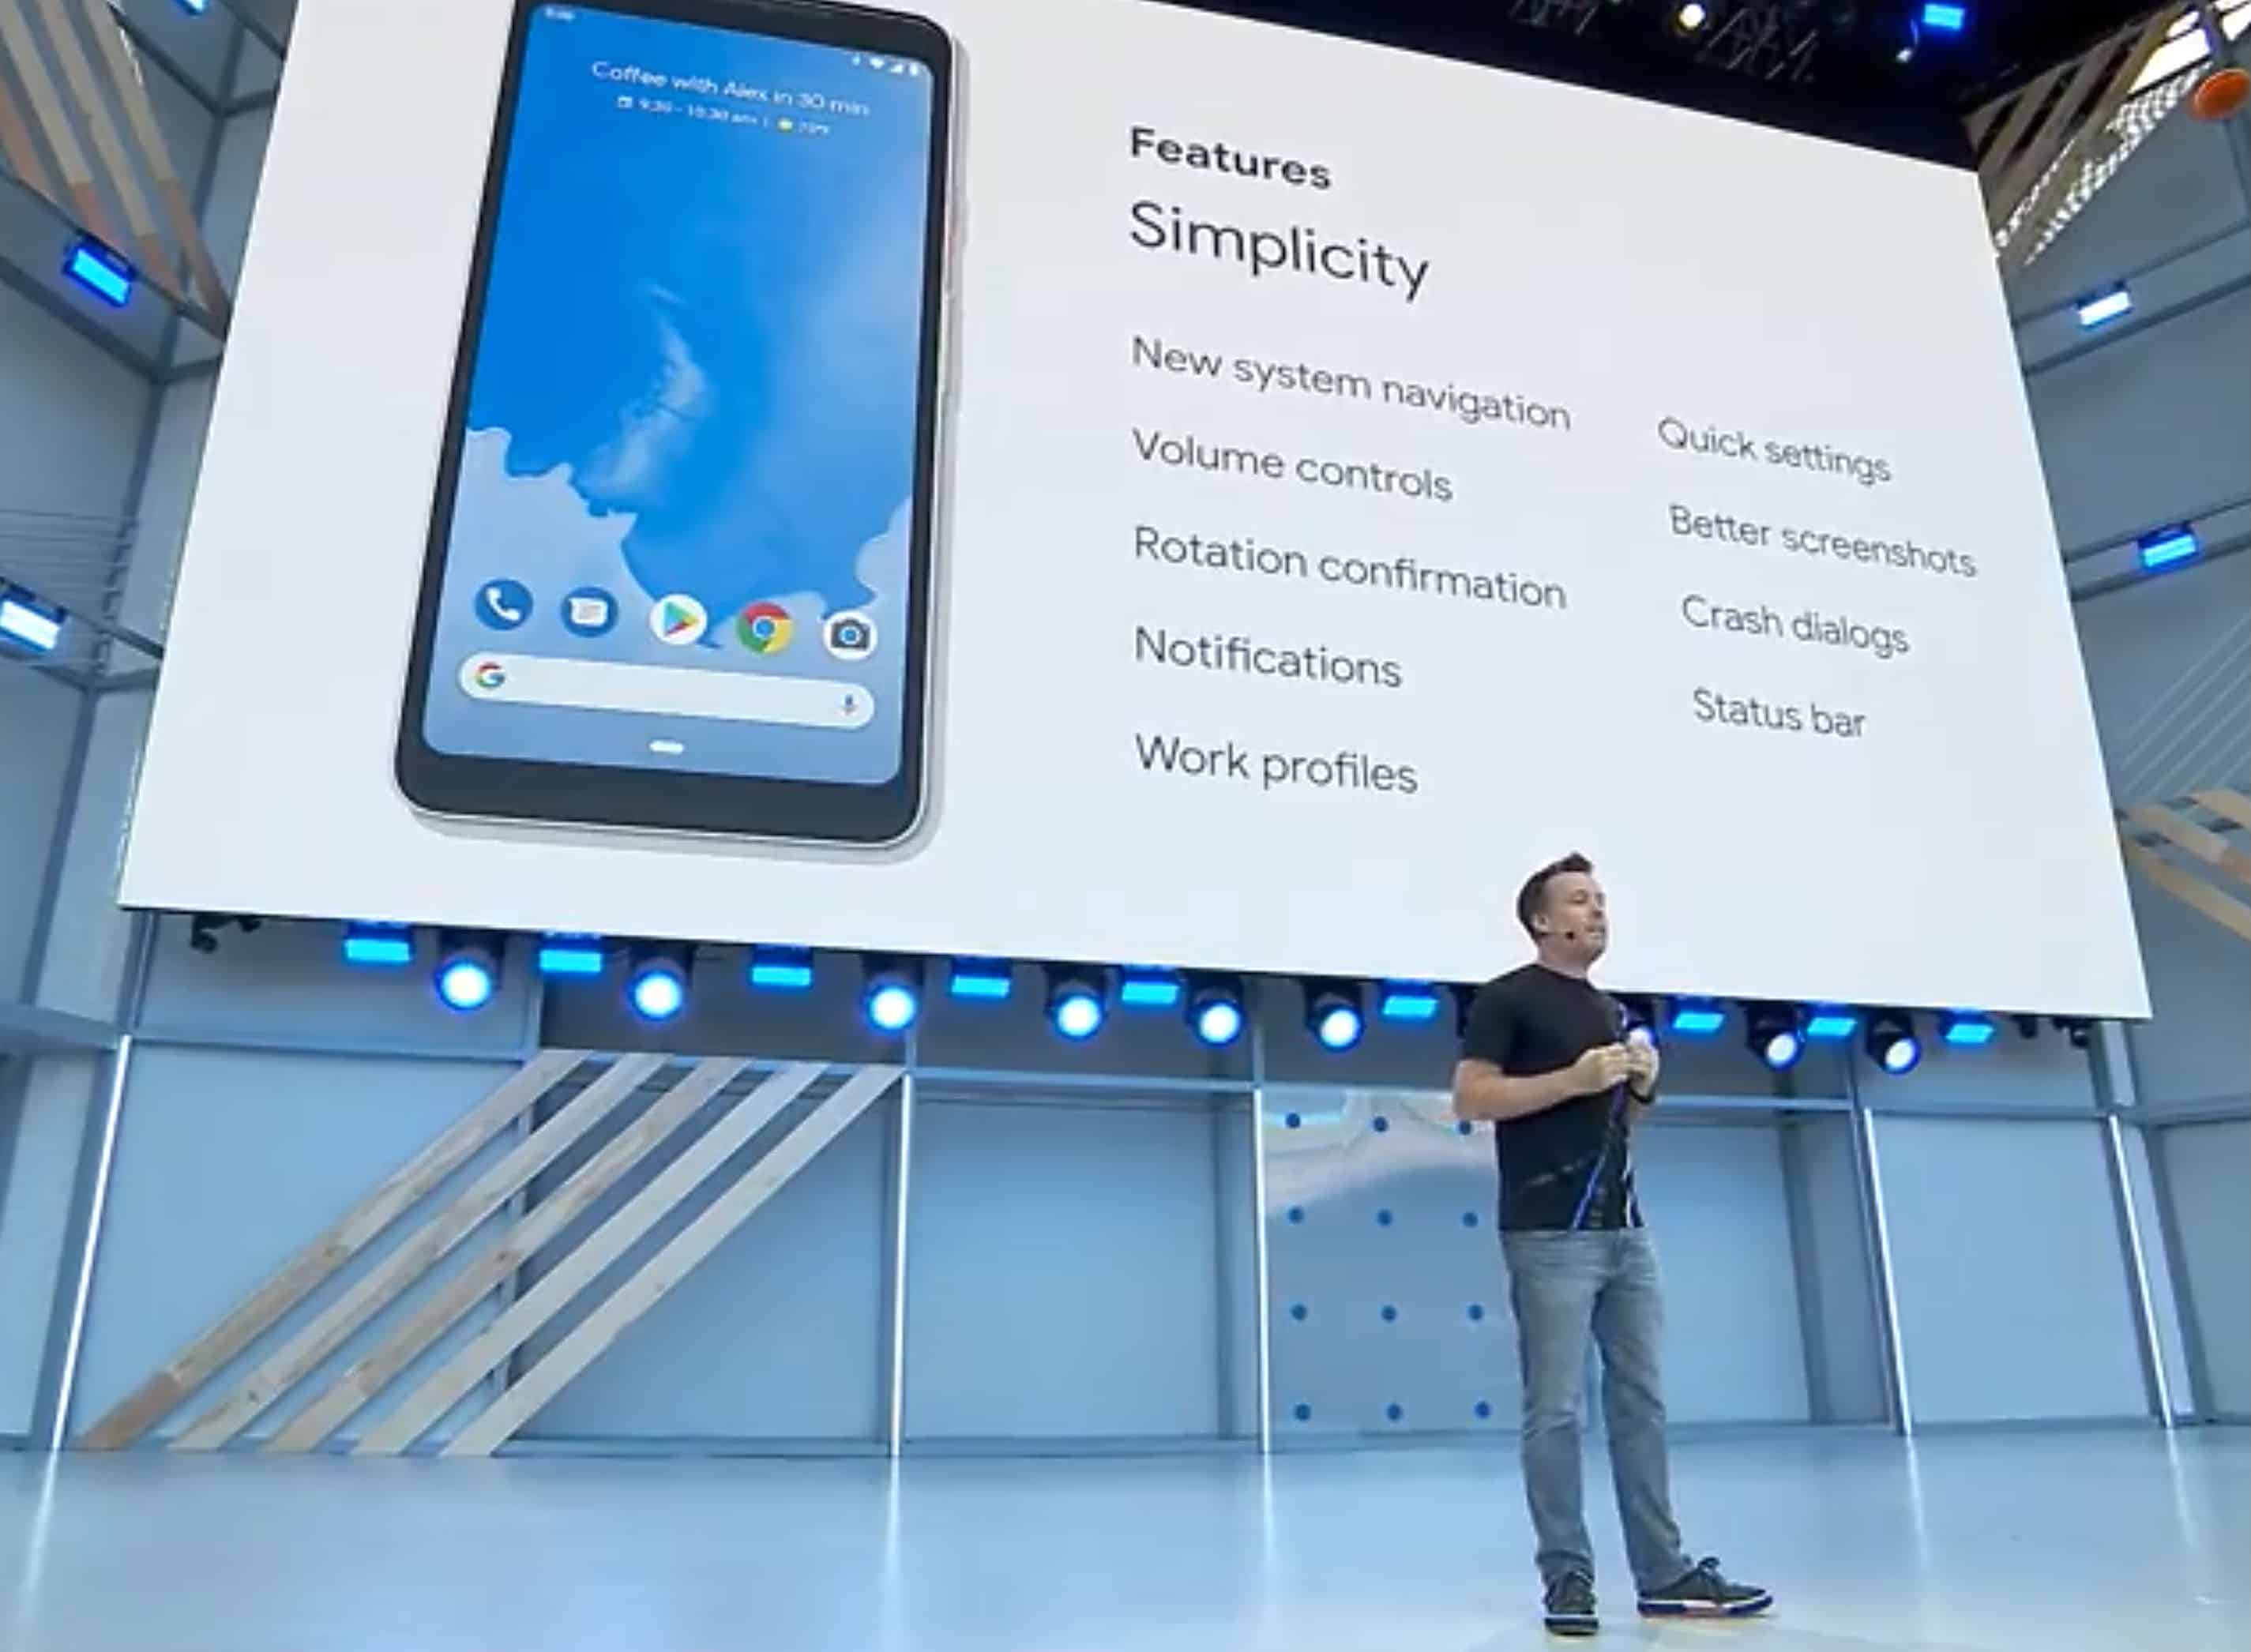 Android P is an AI-focused update of Google's mobile operating system.